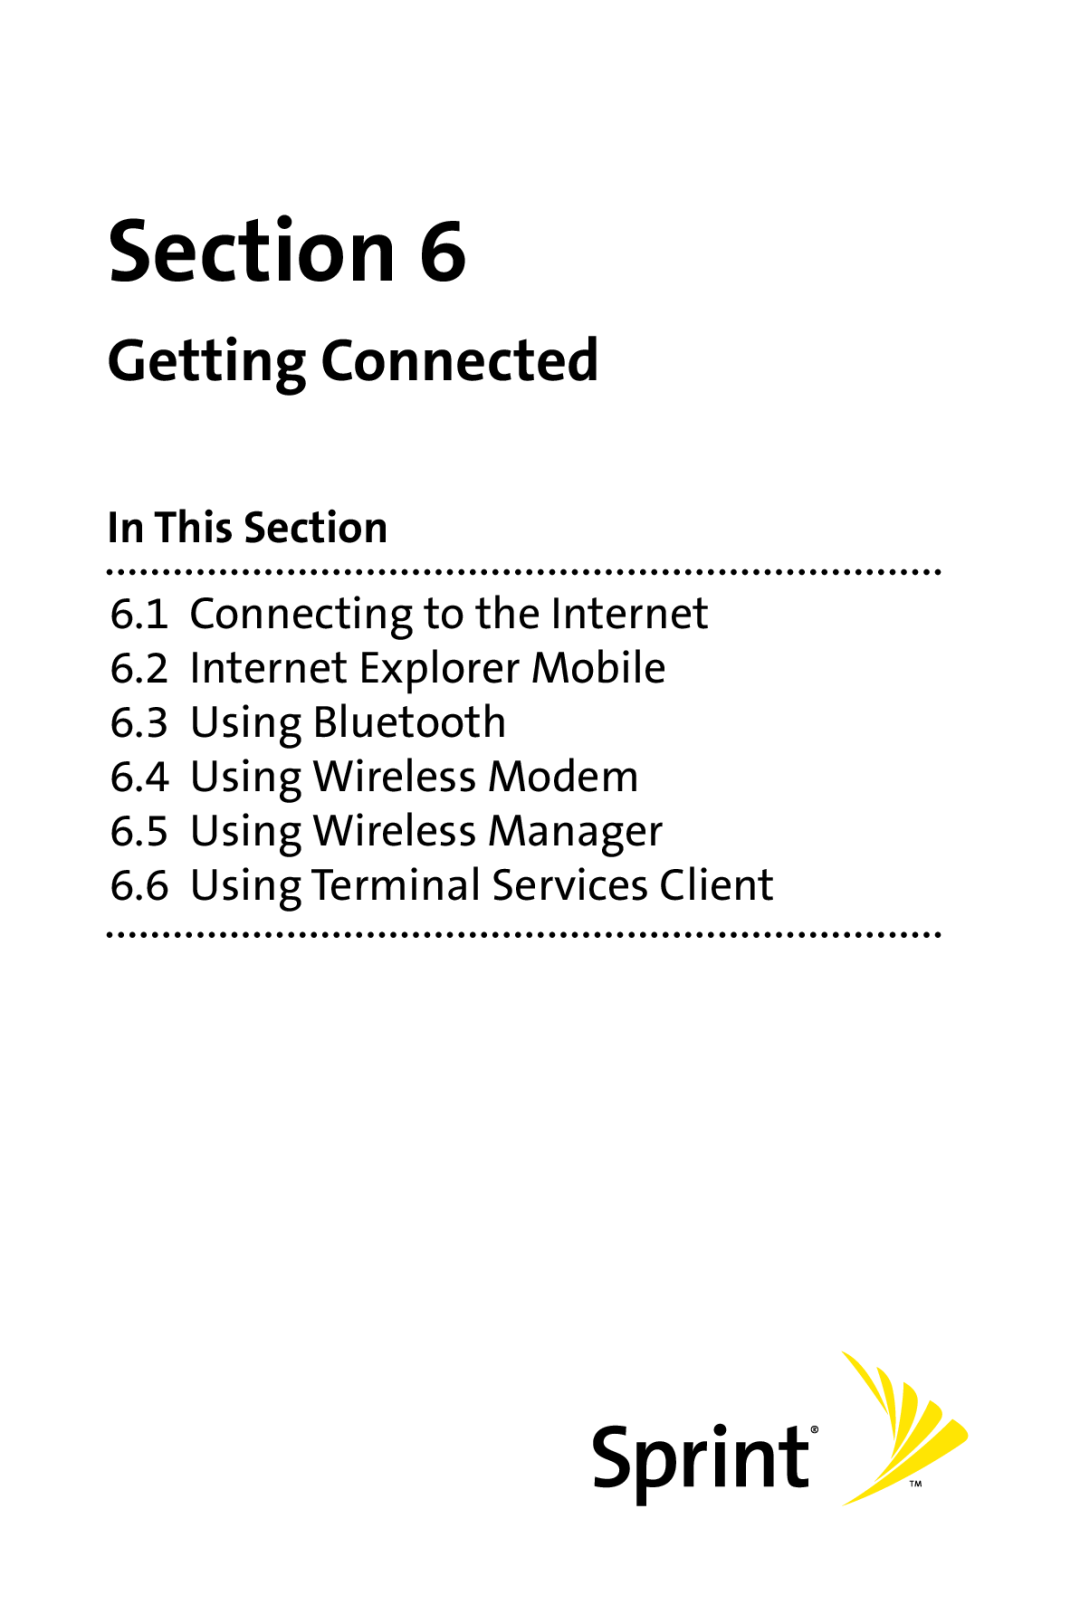 Sprint Nextel PPC-6700 manual Getting Connected, Connecting to the Internet 6.2 Internet Explorer Mobile, Section 